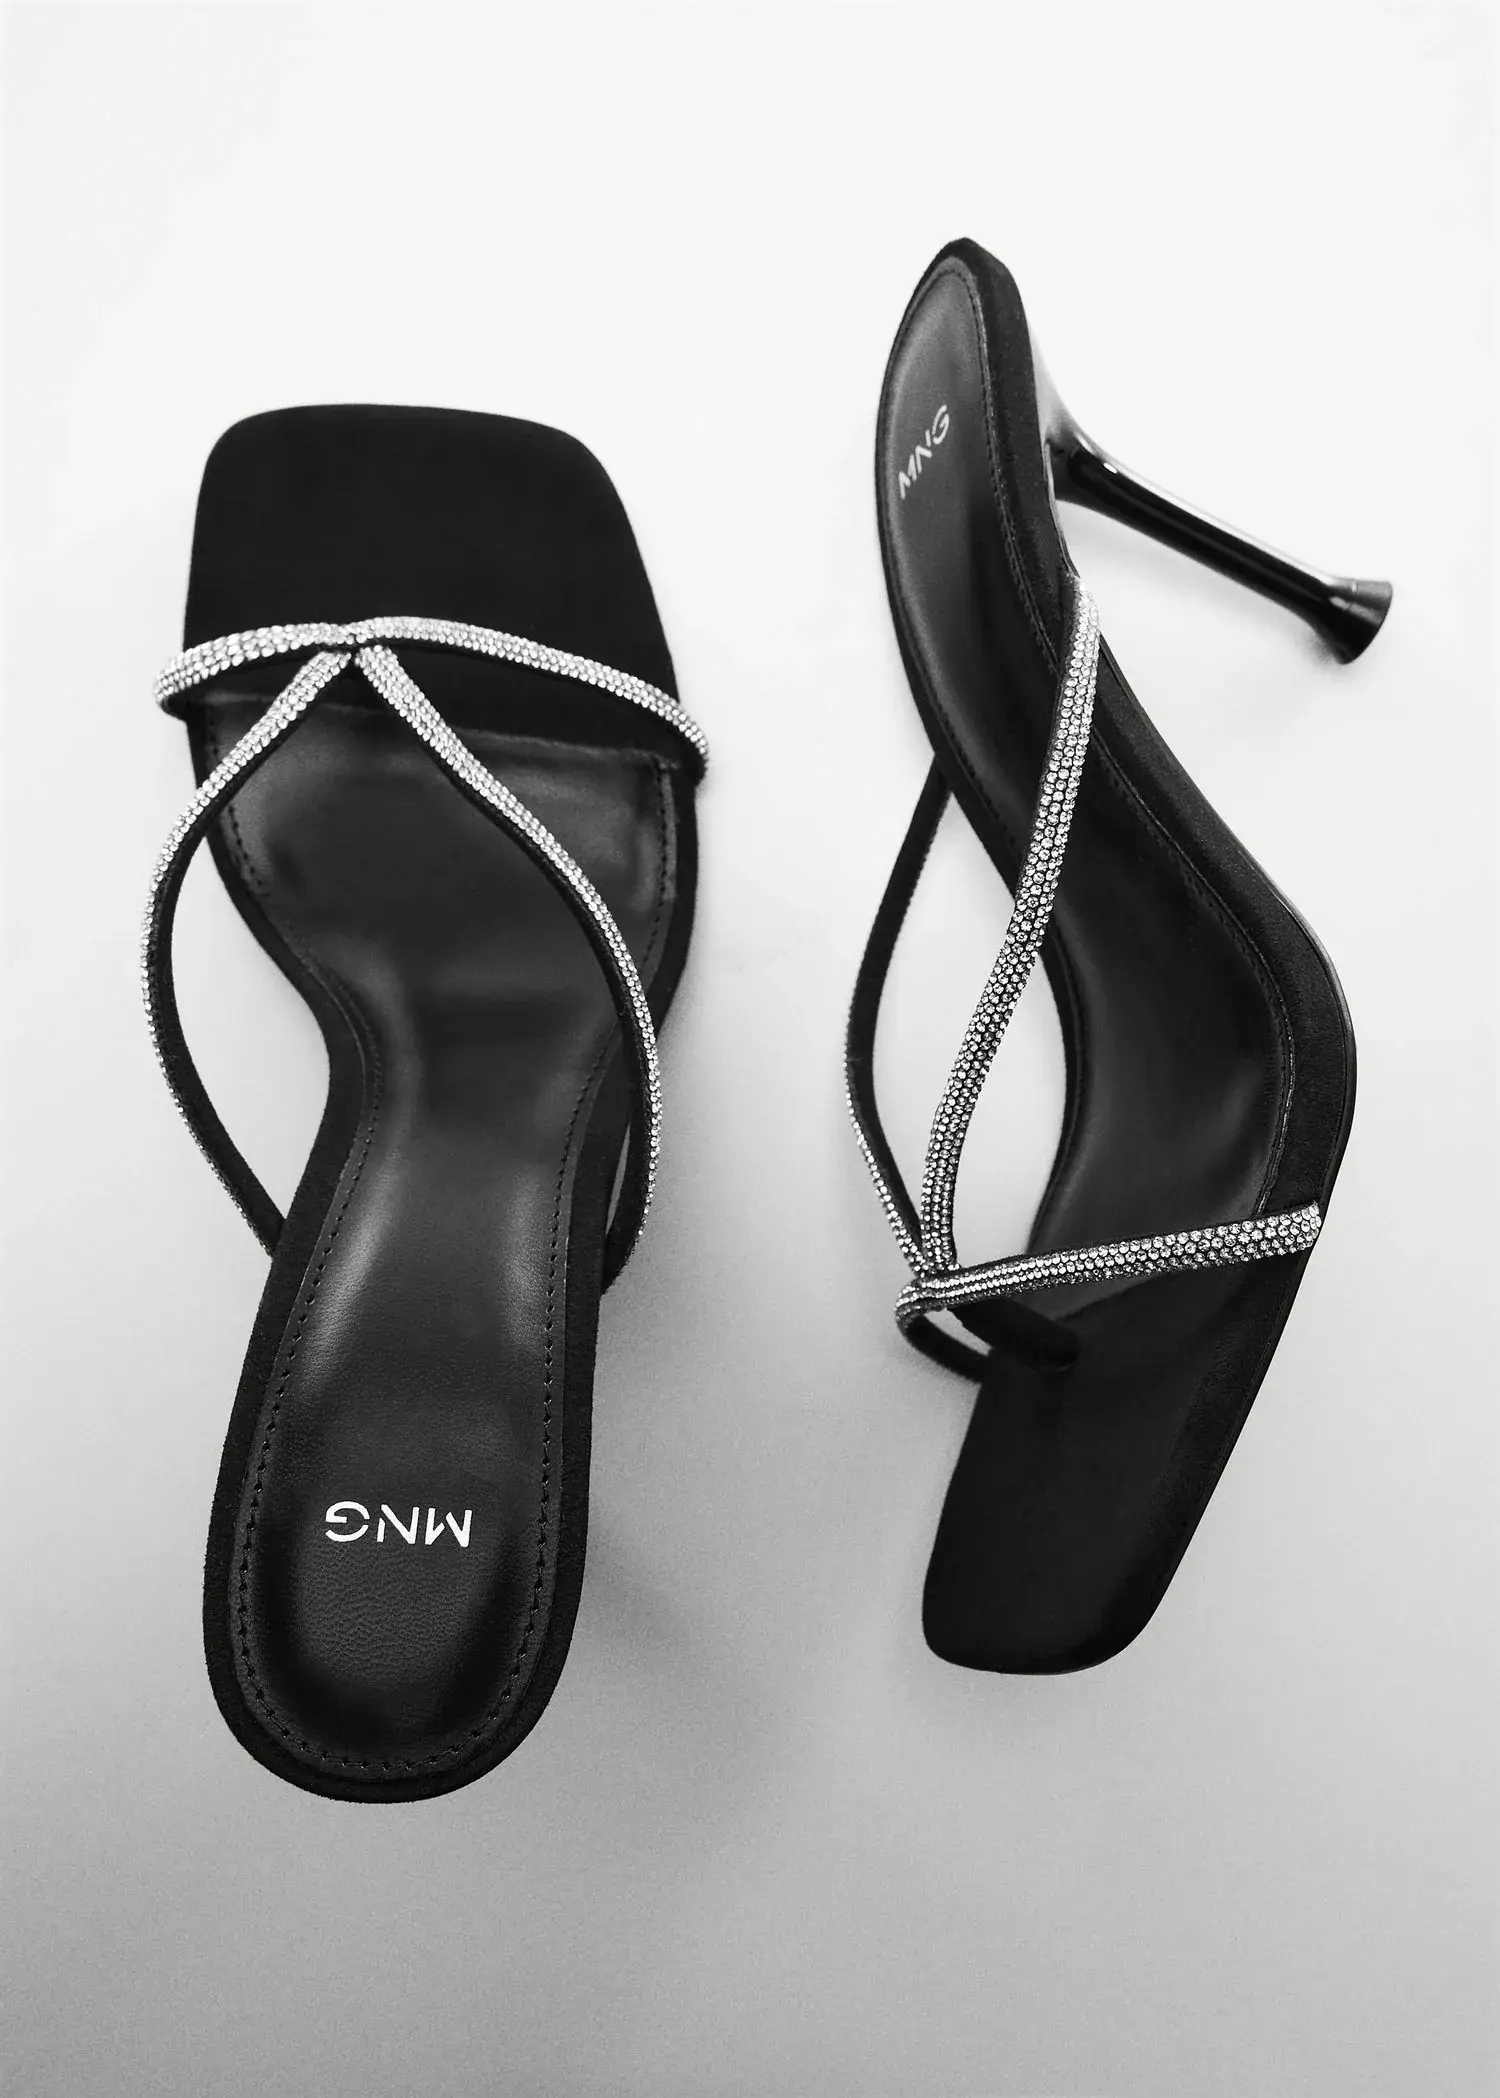 Mango Heeled sandals with rhinestone straps. a pair of black sandals with a diamond pattern on them. 